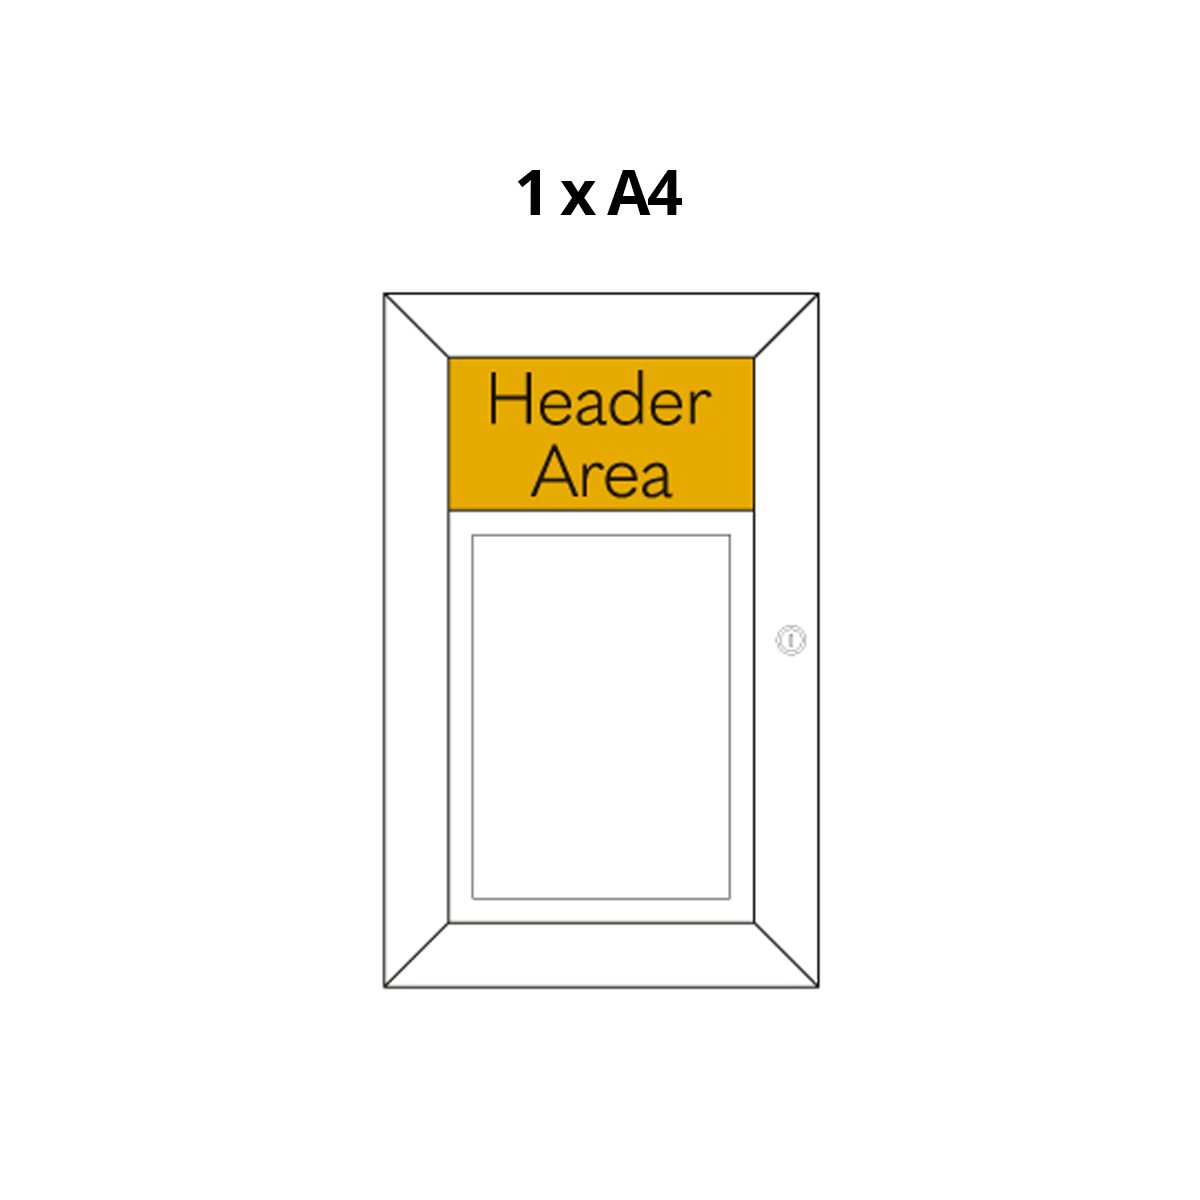 LED Illuminated Poster Display Case 1x A4 Poster Frame